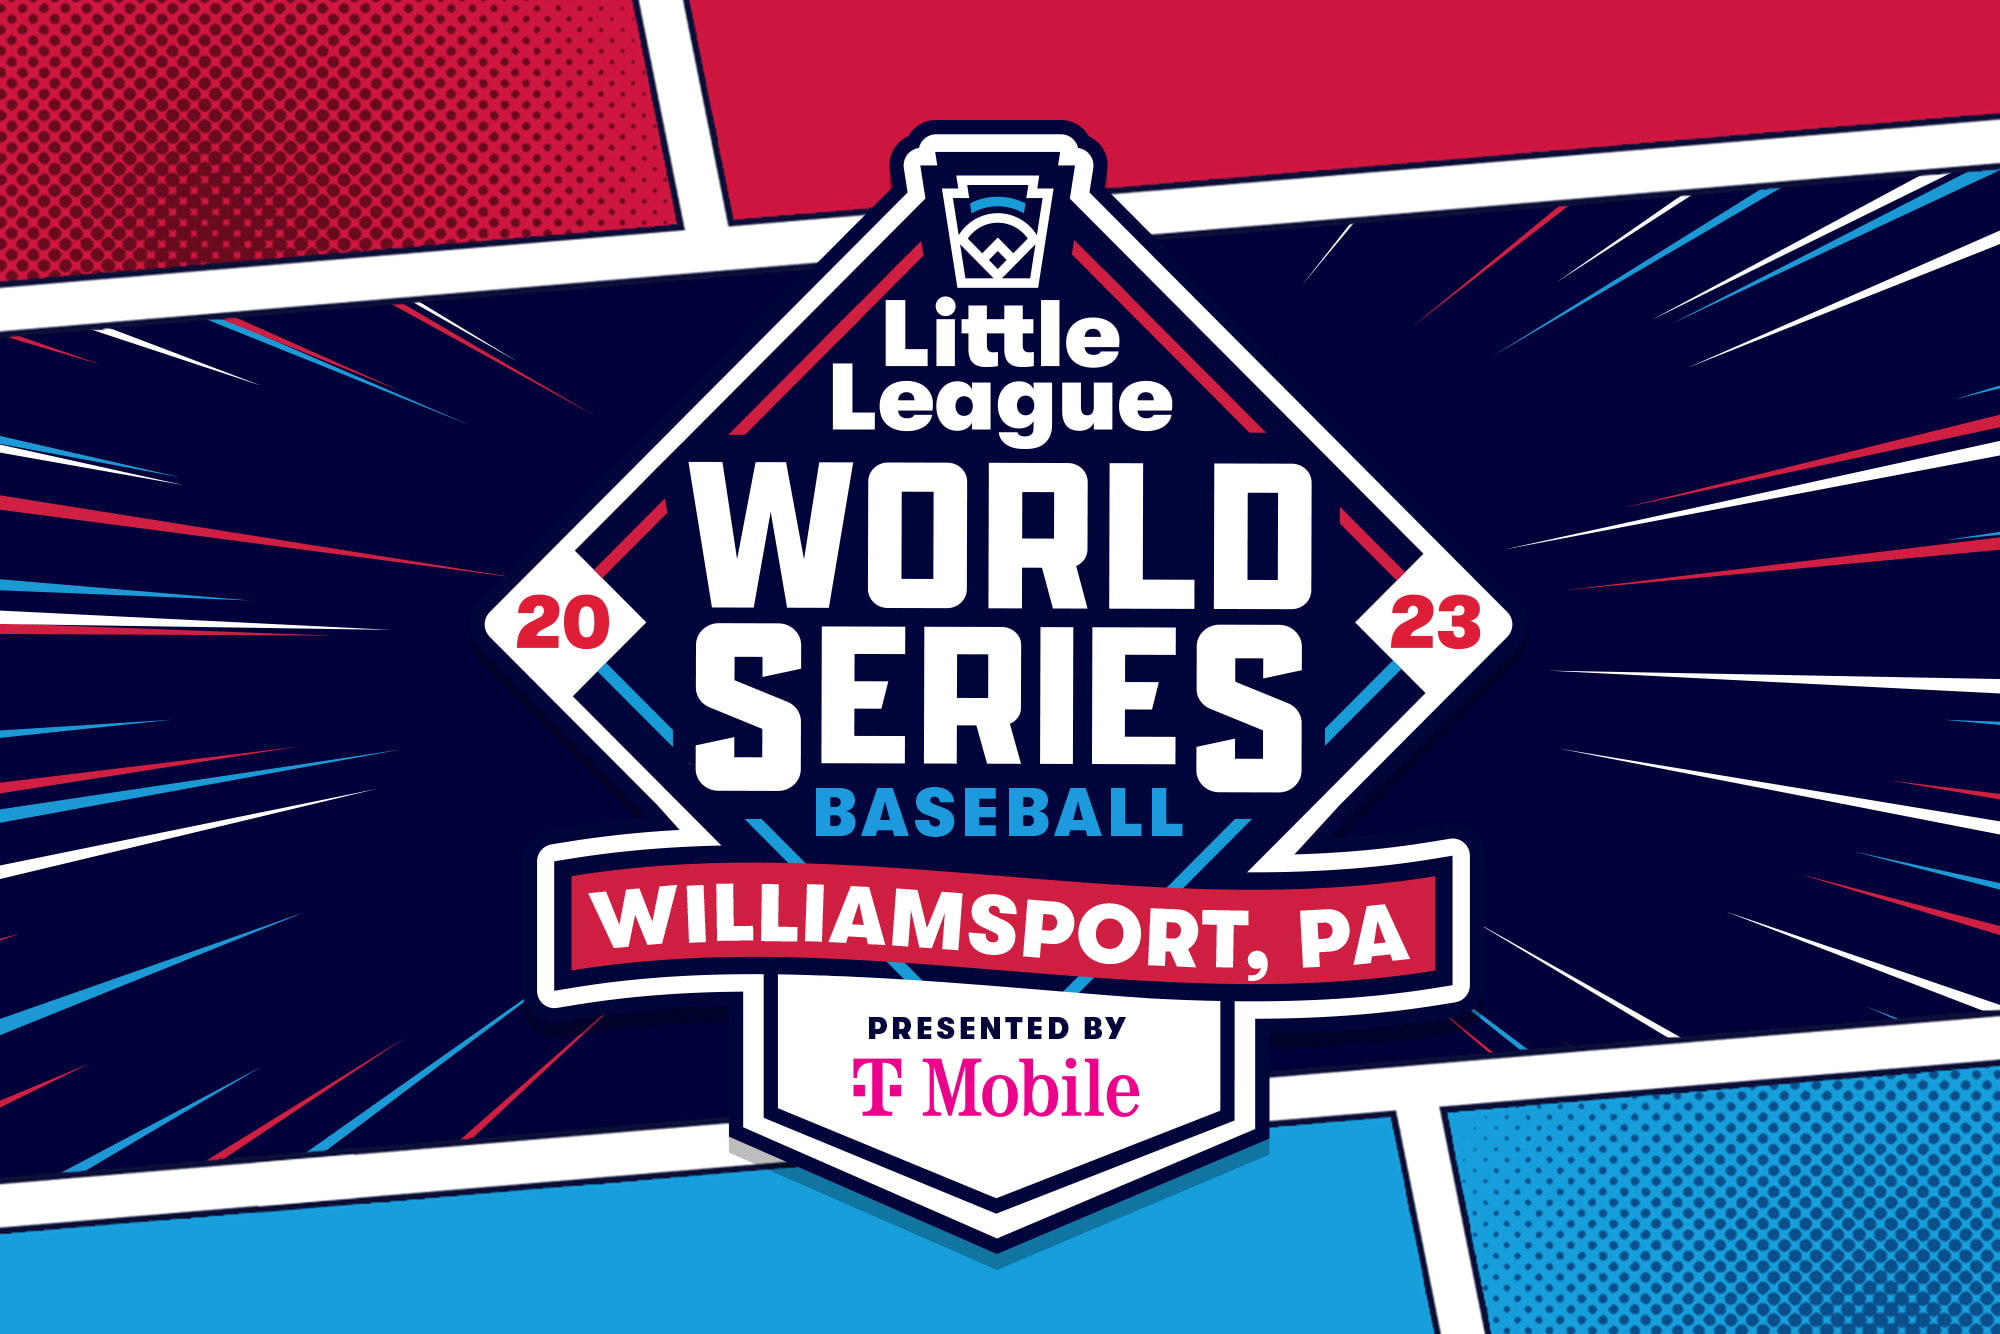 Little League World Series makes major change for player safety